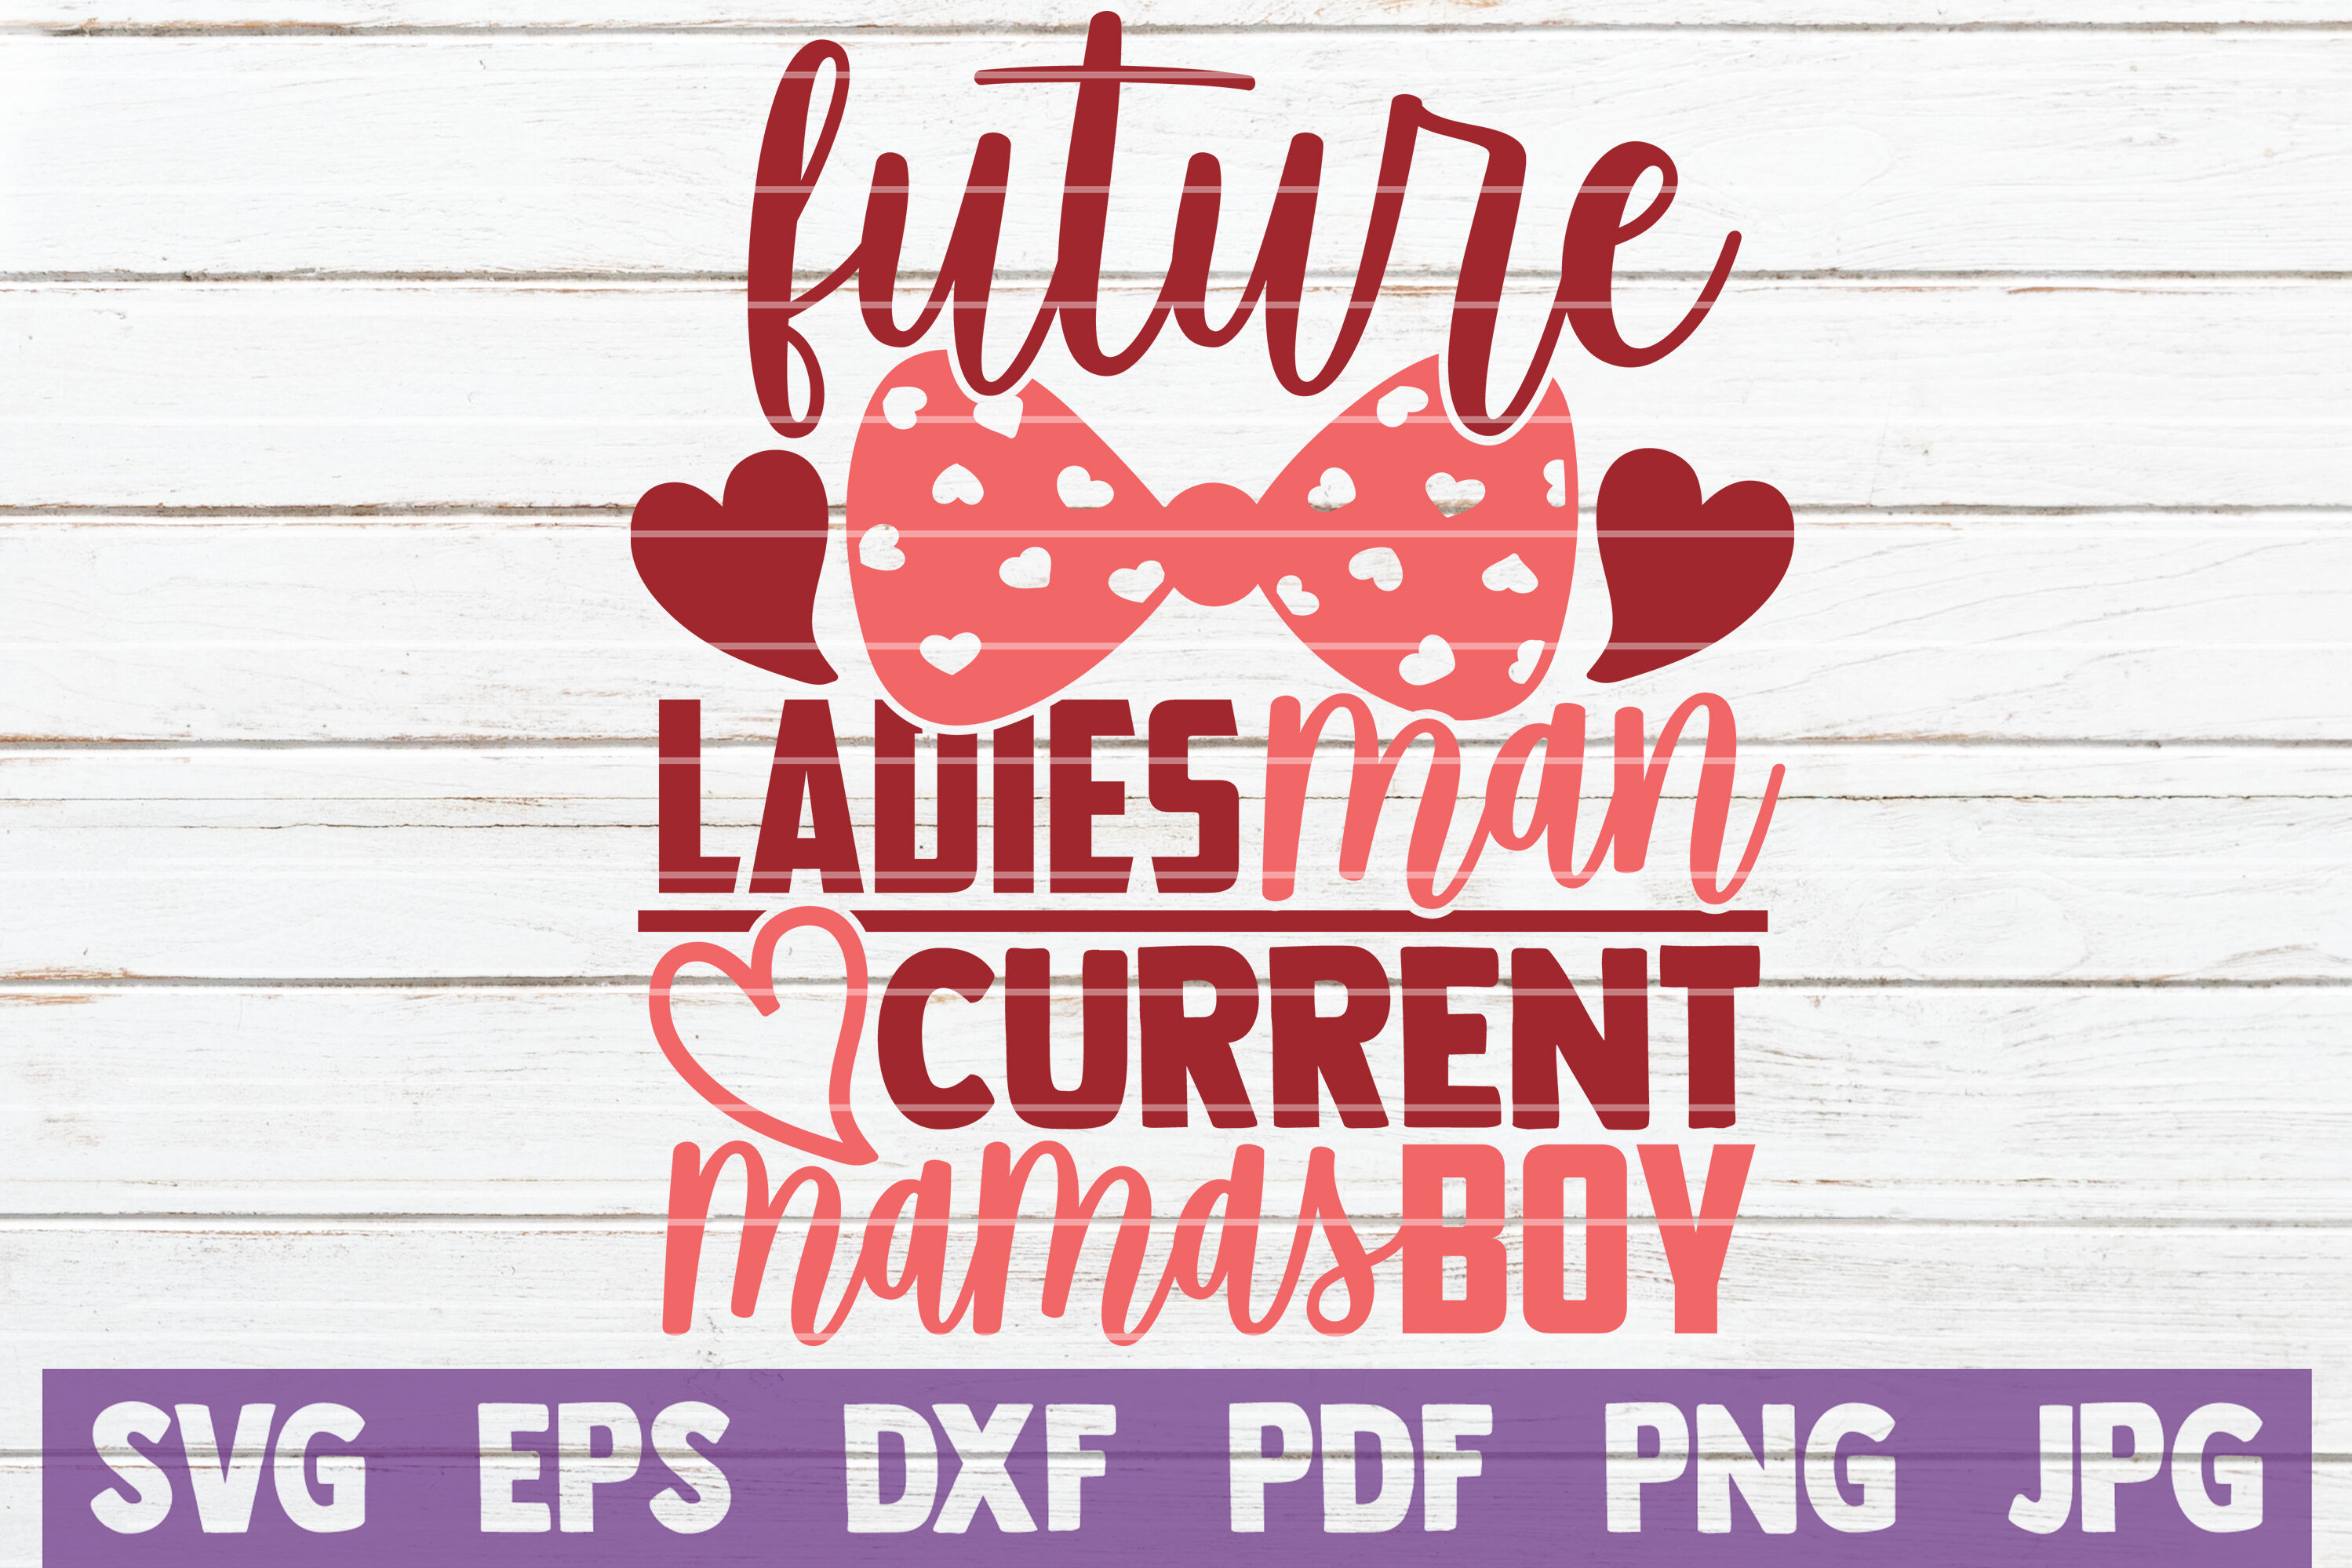 Future Ladies Man Current Mamas Boy SVG Cut File By MintyMarshmallows ...